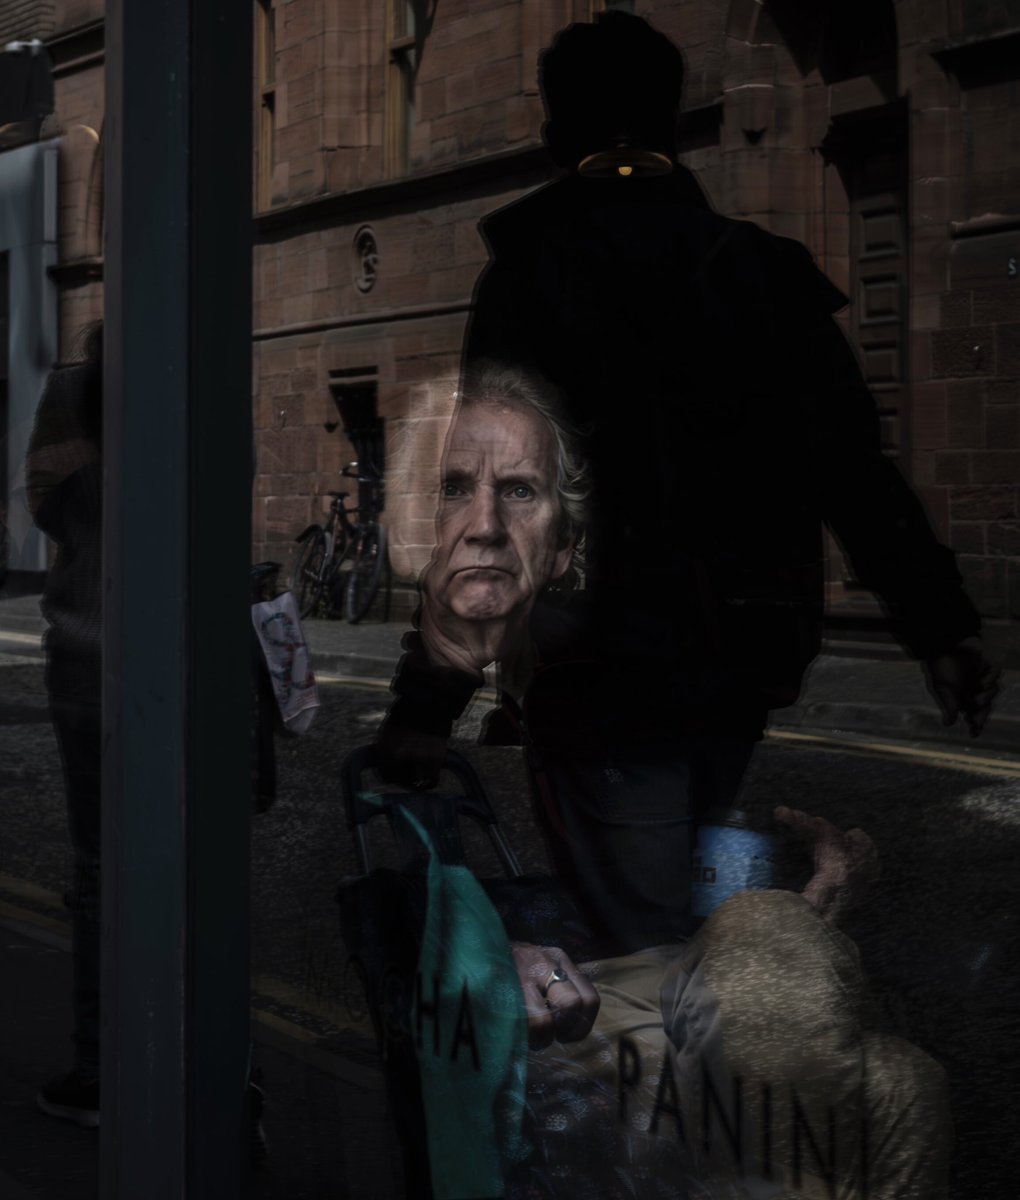 Face in the window. #belfaststreets   #documentary-photography #fromstreetswithlove #capturestreets  #gf_streets #streetdreams #timeless_streets #streetphotographyworldwide #hcsc_street #obscureshots #streetphotographersmagazin #cobblescope #tnscollective